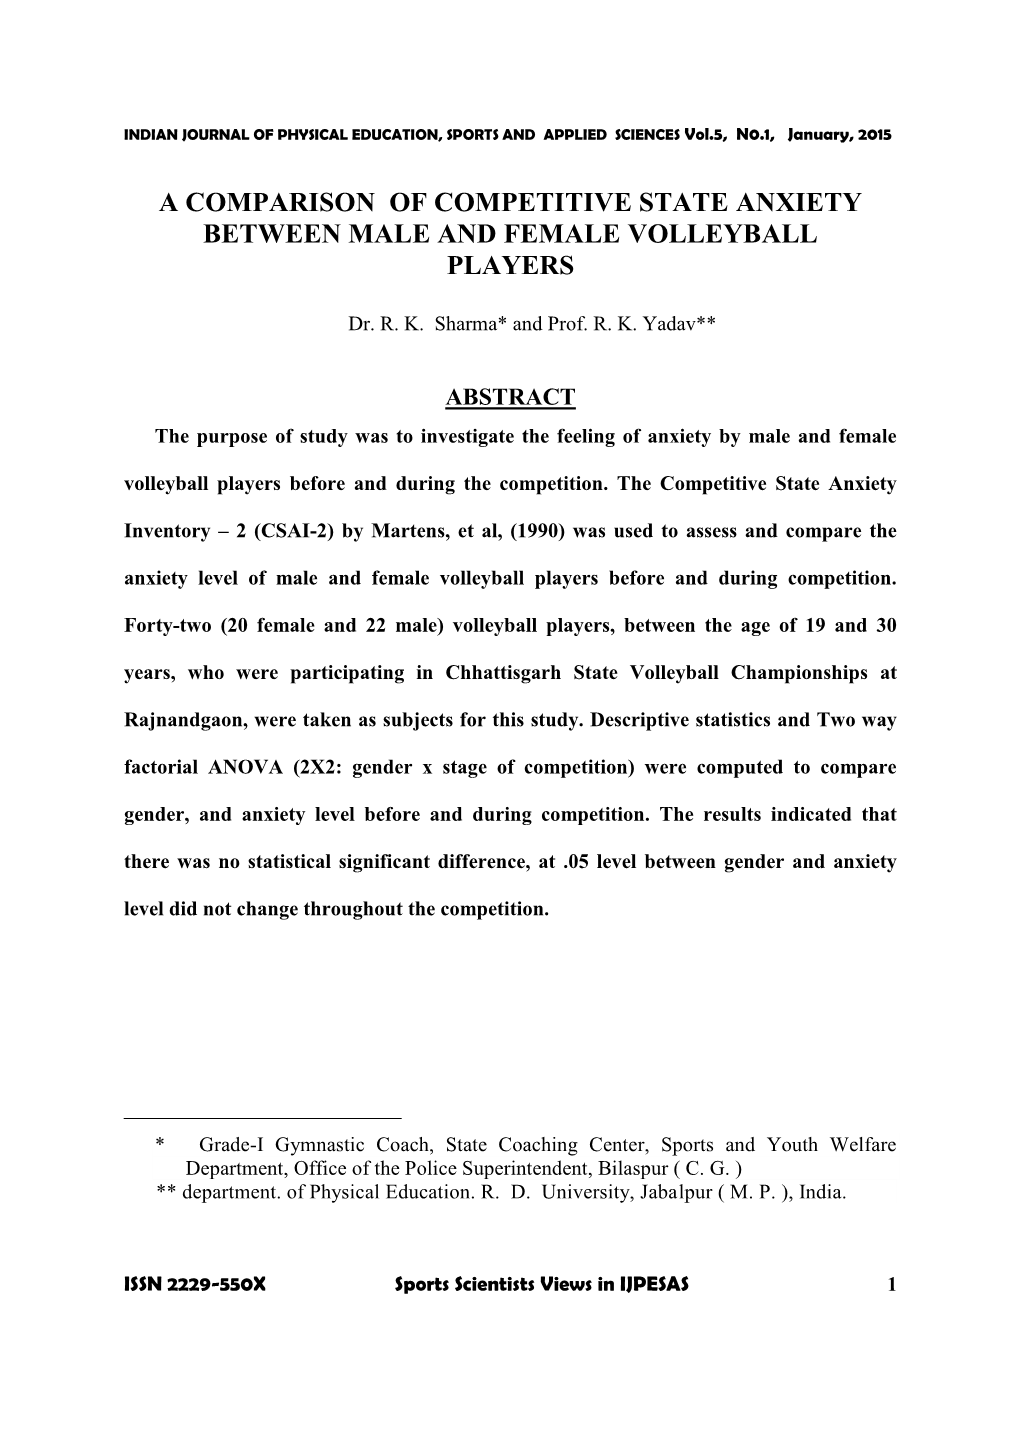 A Comparison of Competitive State Anxiety Between Male and Female Volleyball Players